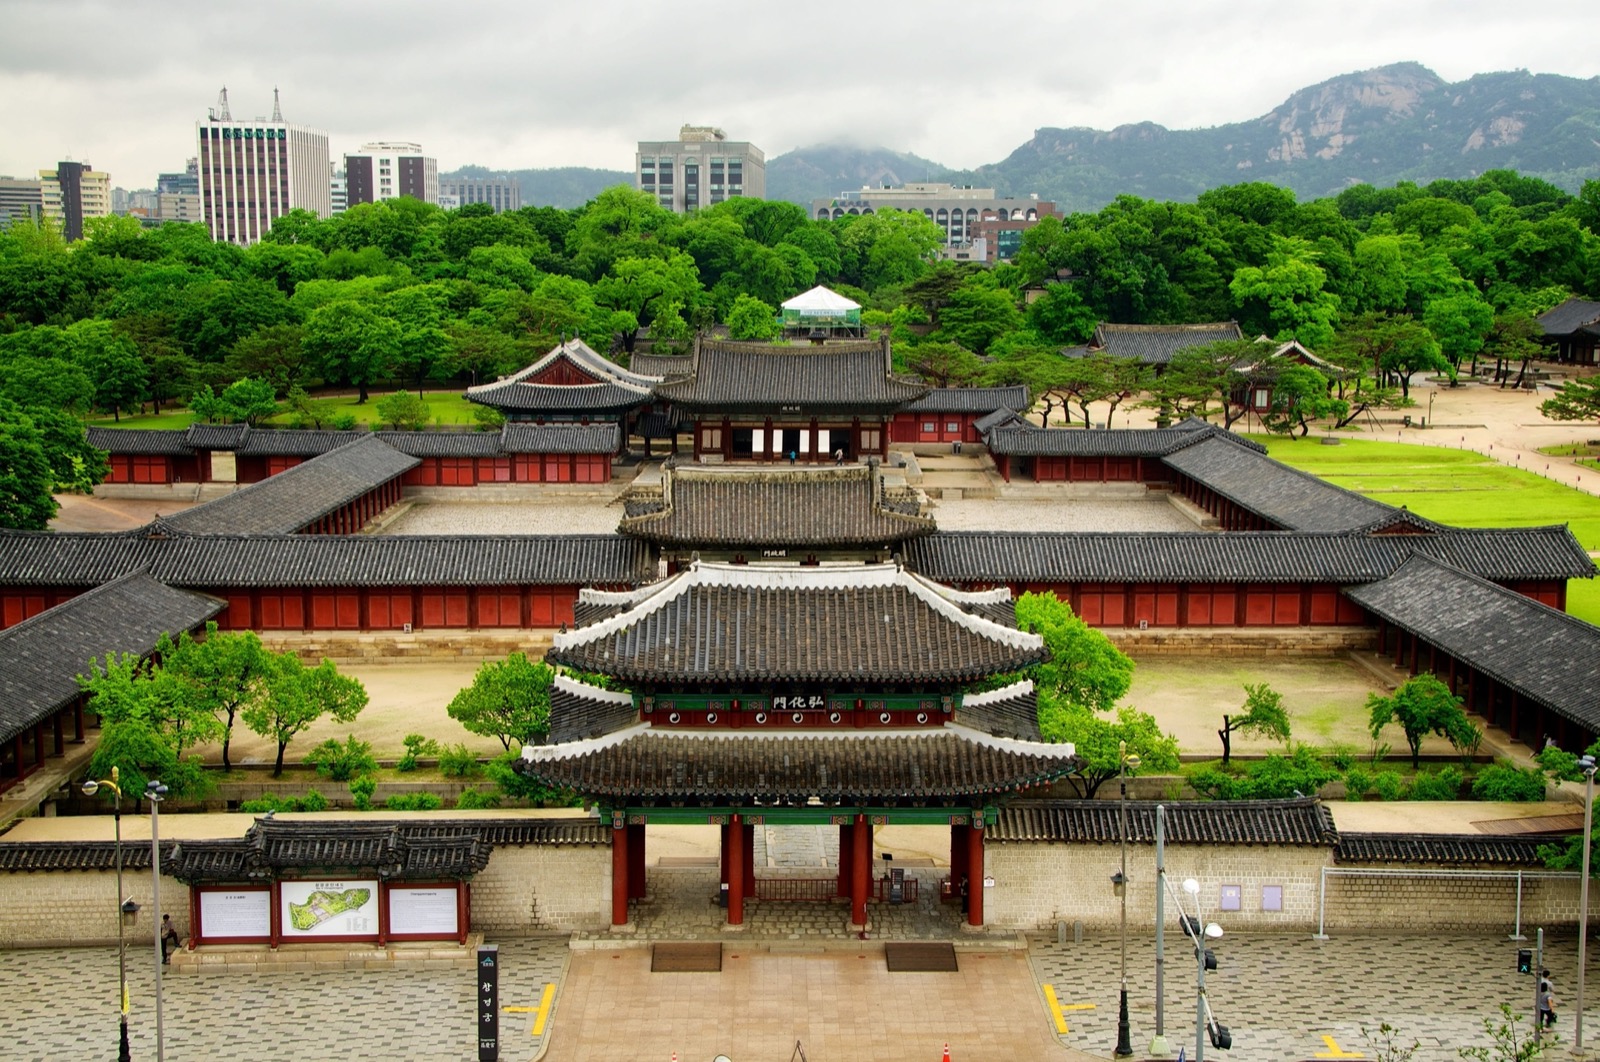 Can You Pass This 40-Question Geography Test That Gets Progressively Harder With Each Question? Changgyeonggung Palace, Seoul, South Korea